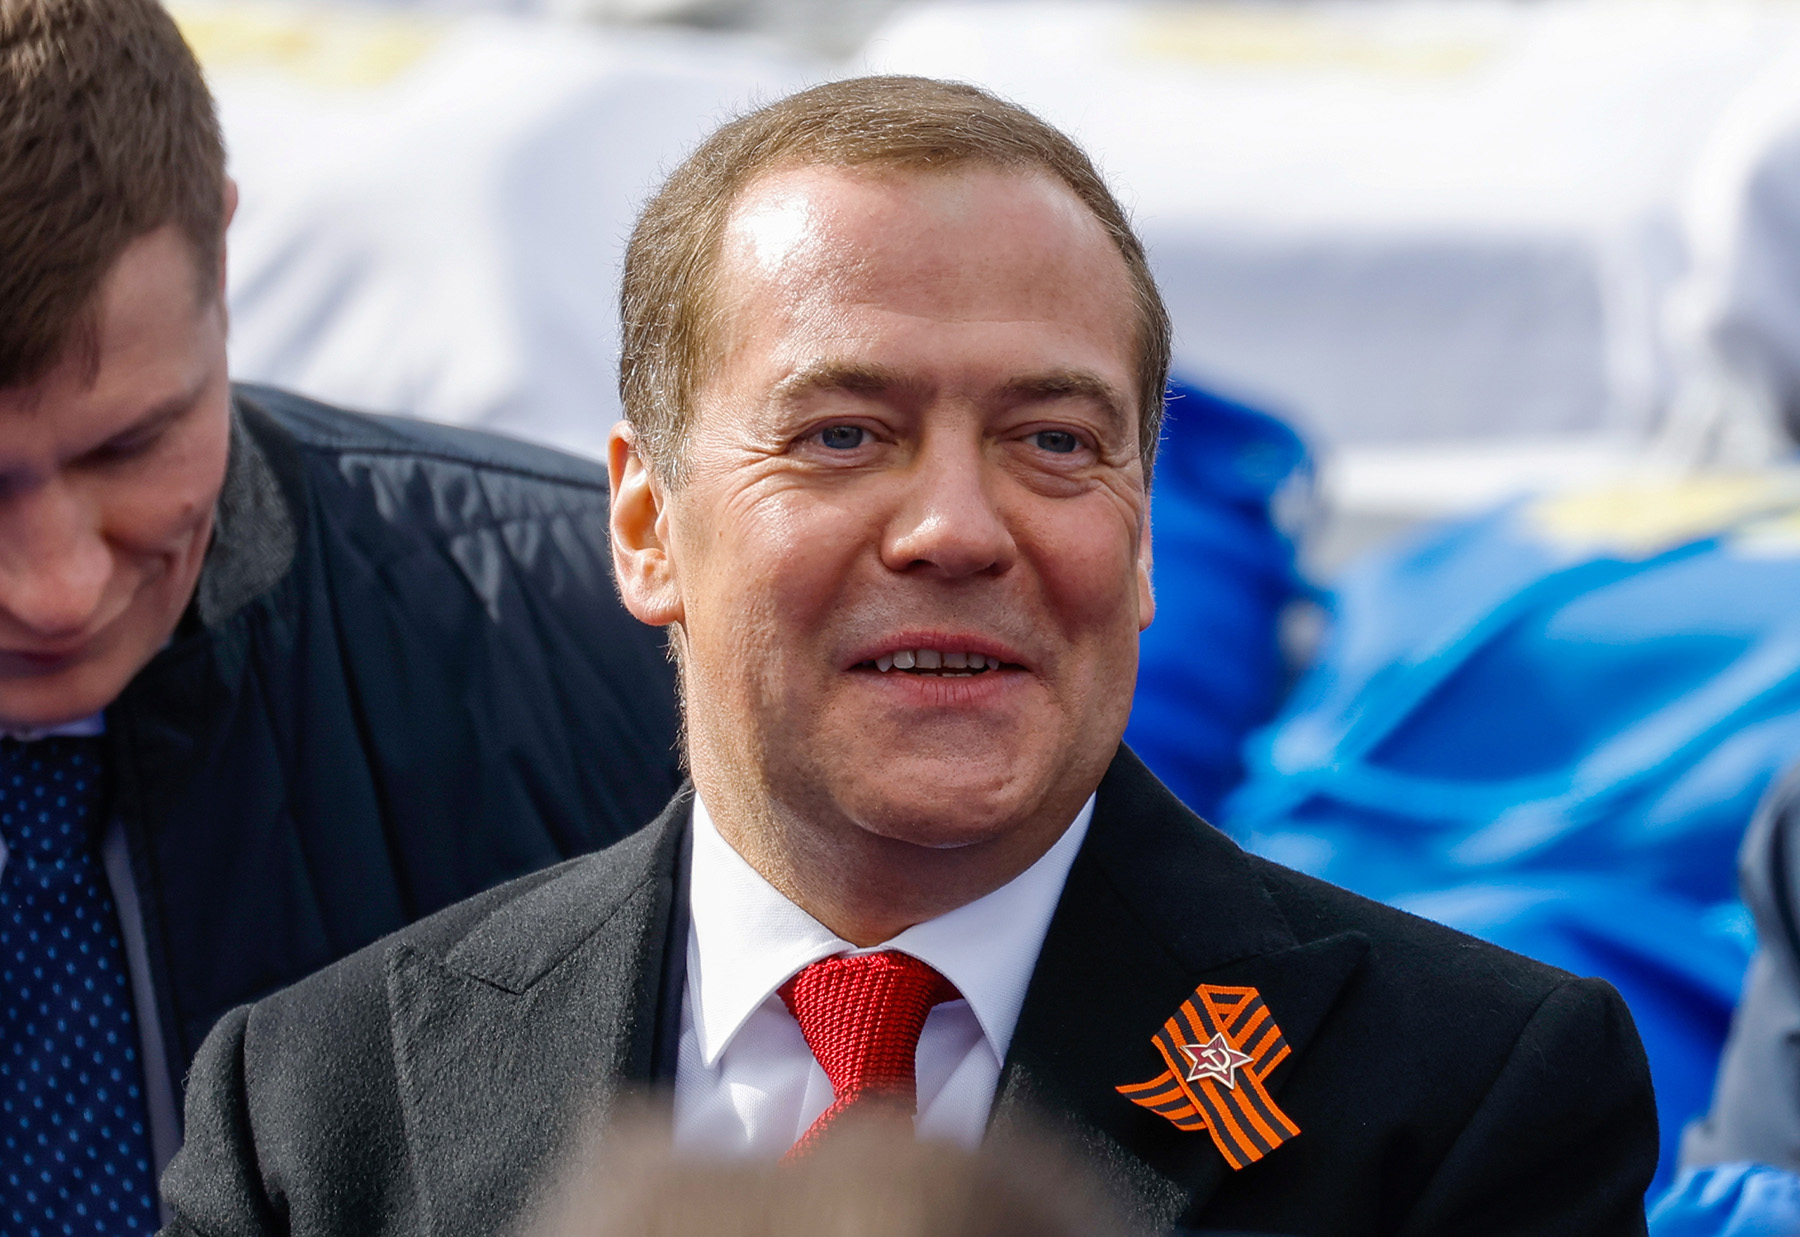 Deputy Chairman of Russia's Security Council Dmitry Medvedev attends a military parade on Victory Day in Red Square in central Moscow, Russia, on May 9.